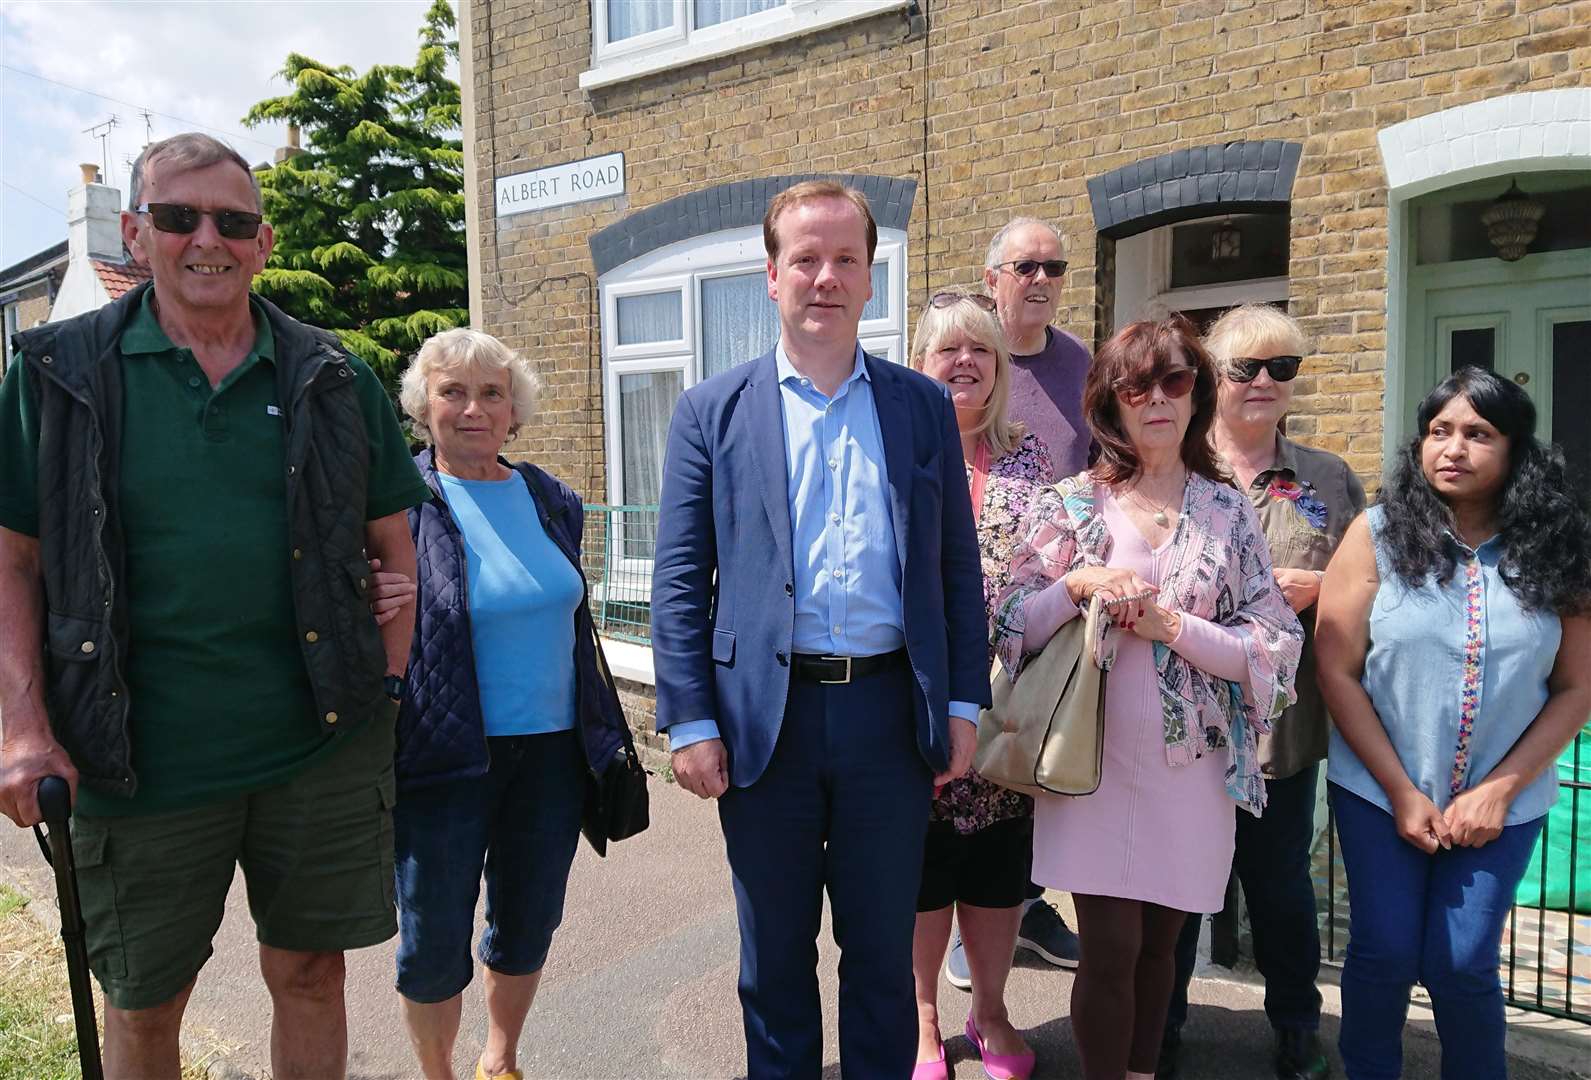 MP Charlie Elphicke is standing up for residents in Albert Road (2573715)